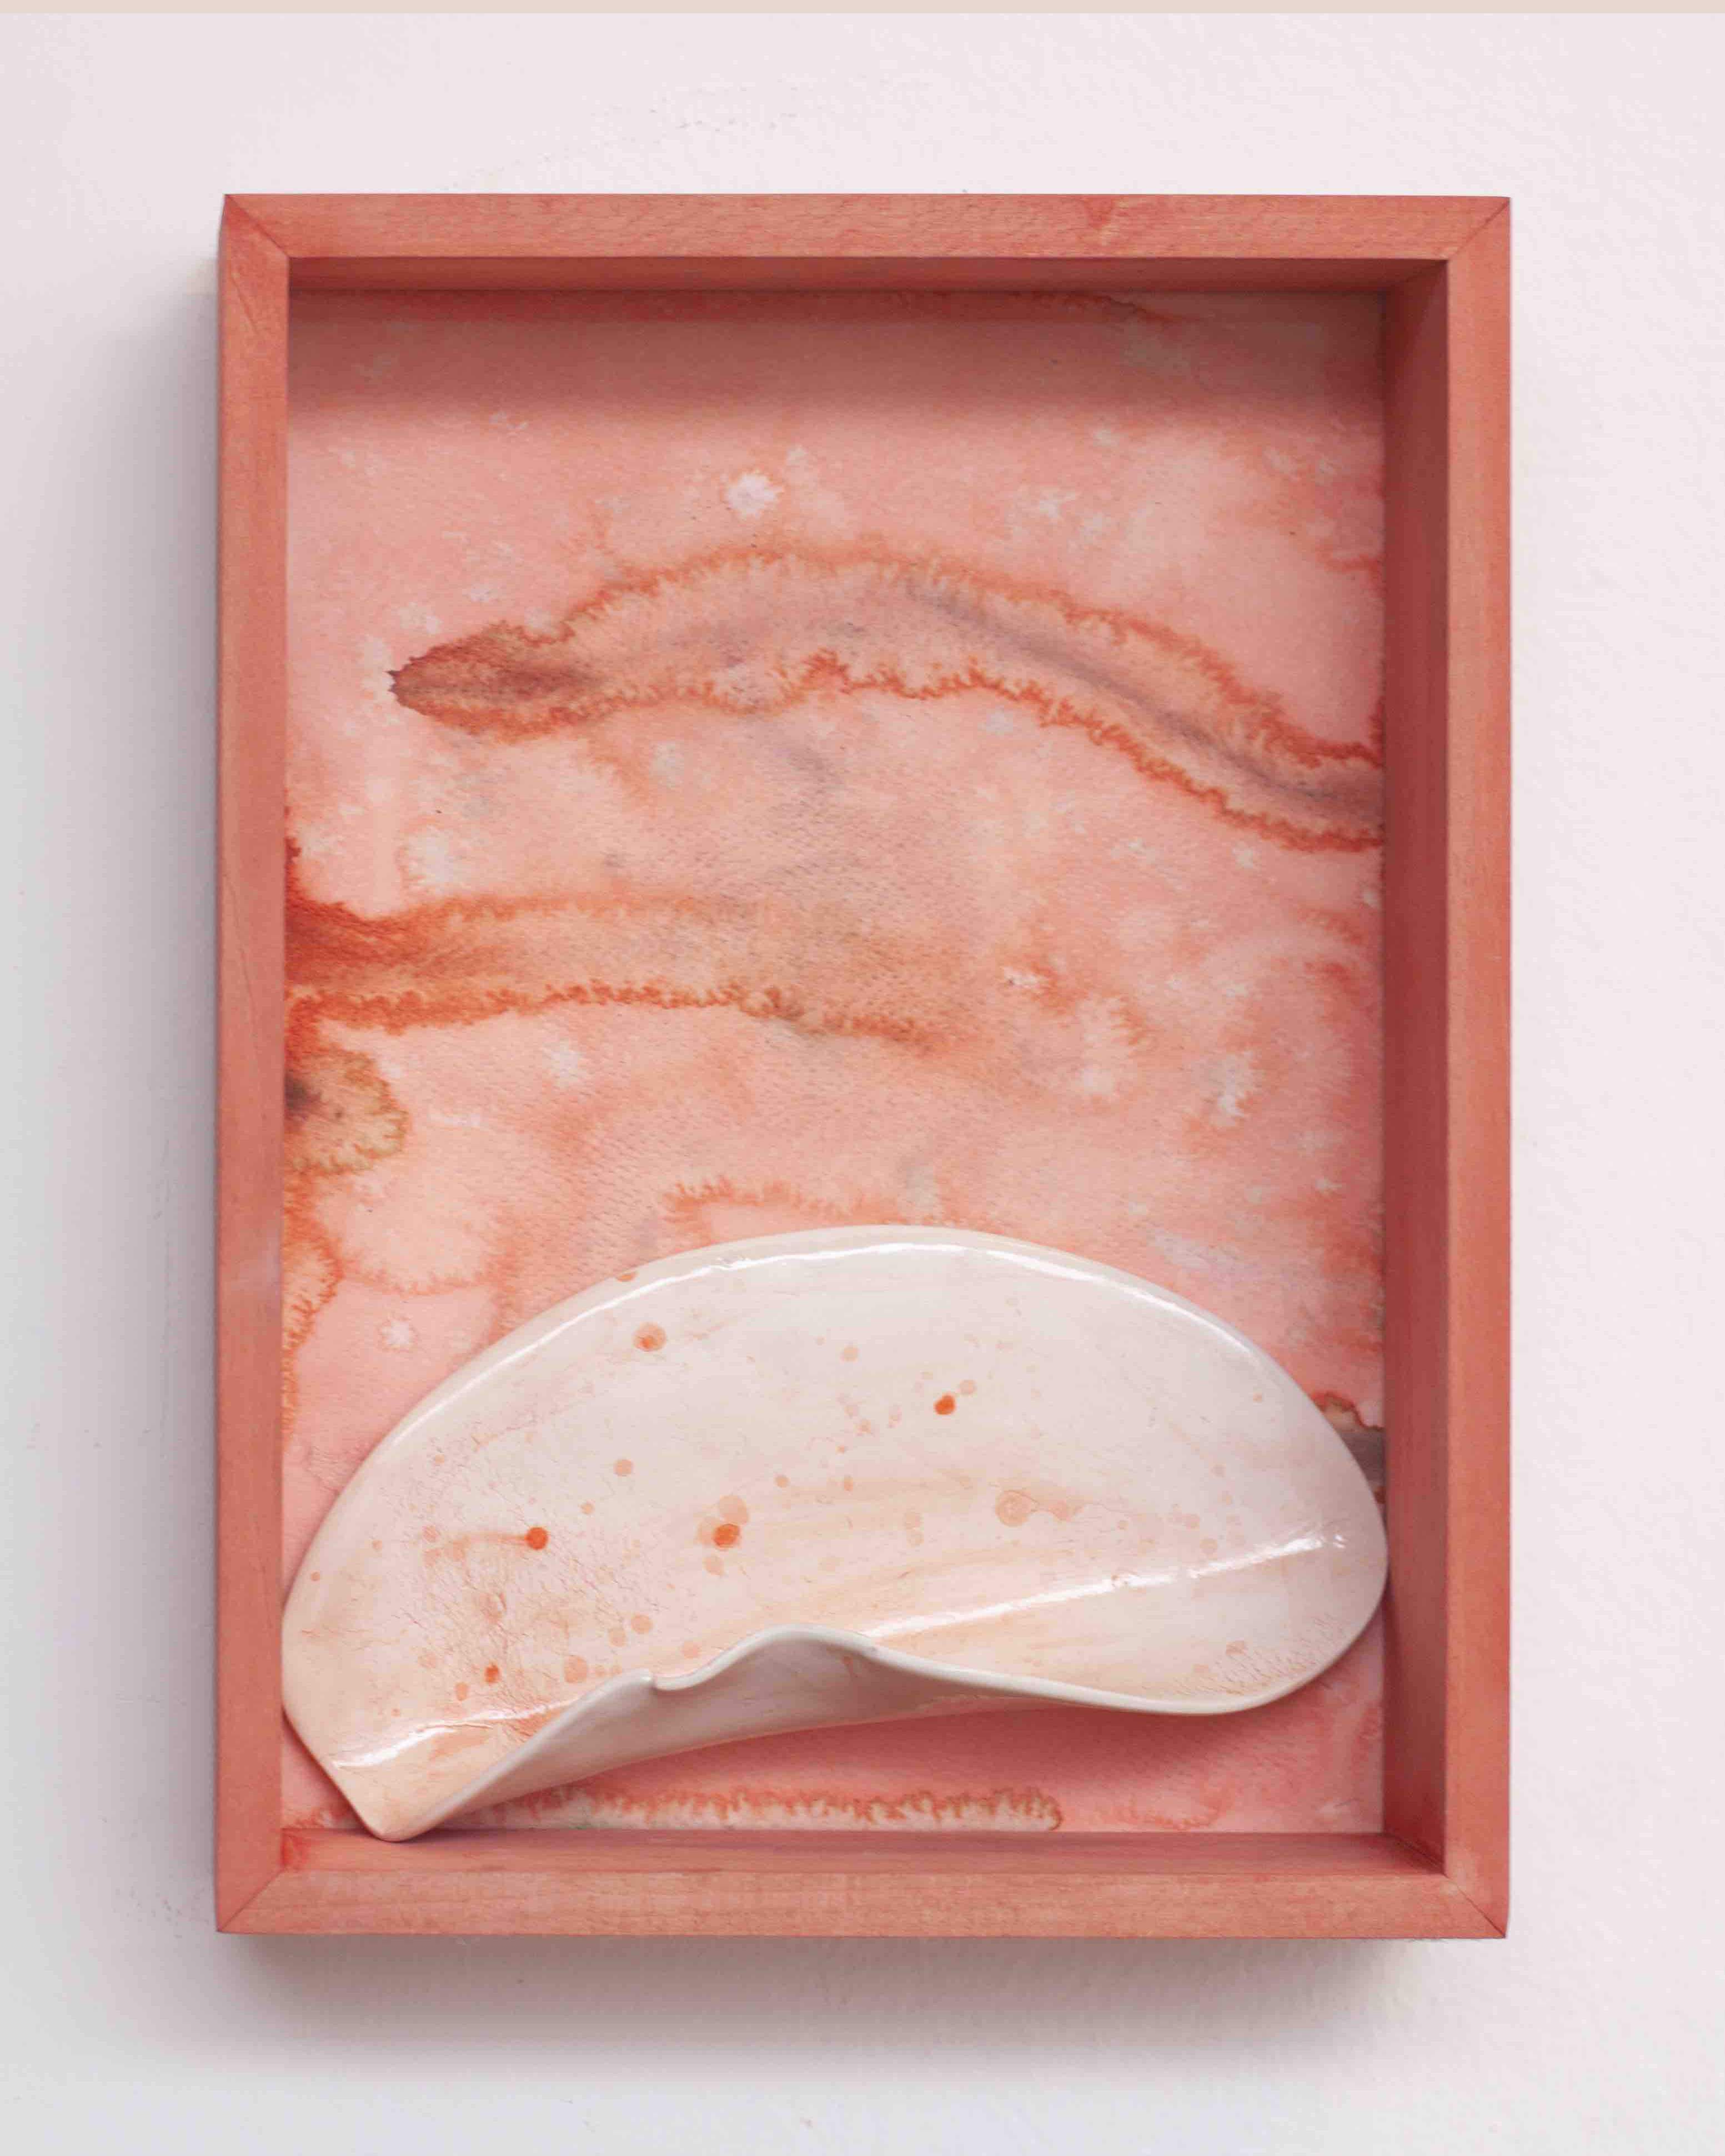 2022, watercolor on paper, wood and glazed ceramic, 34 × 25 cm